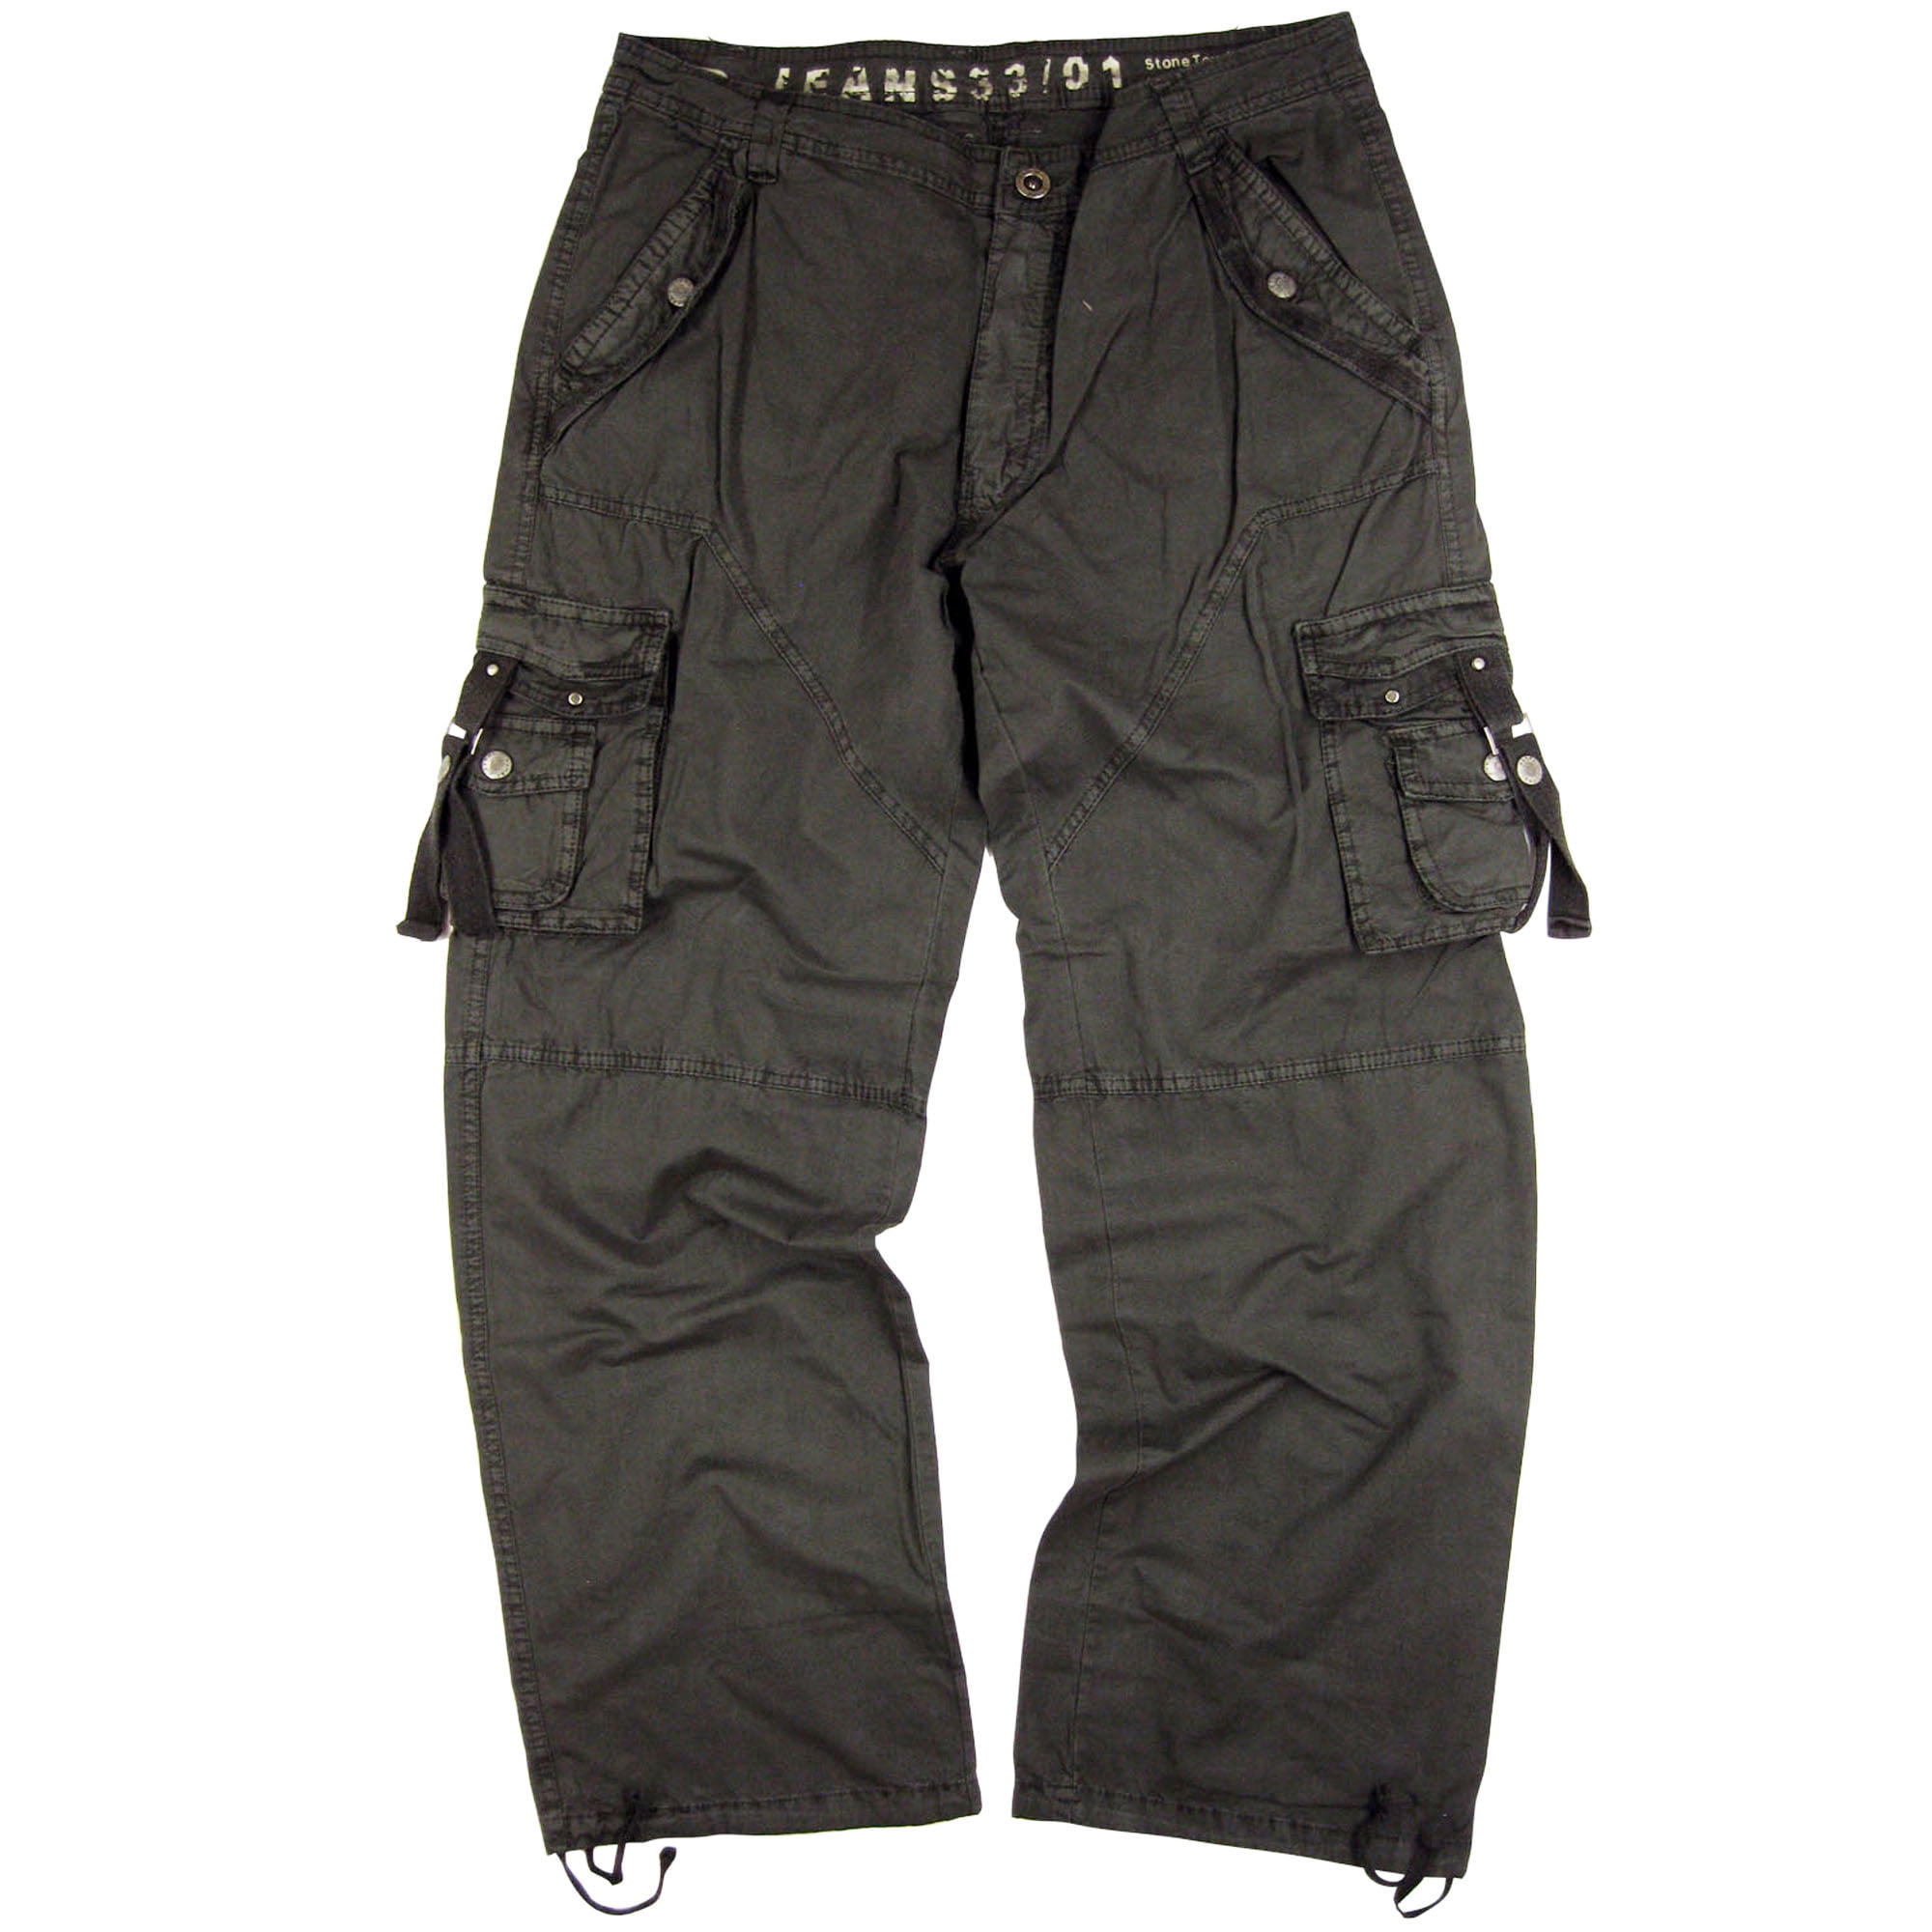 StoneTouch Men's Military-Style Cargo Pants.Have Many Pockets A8-Dk ...